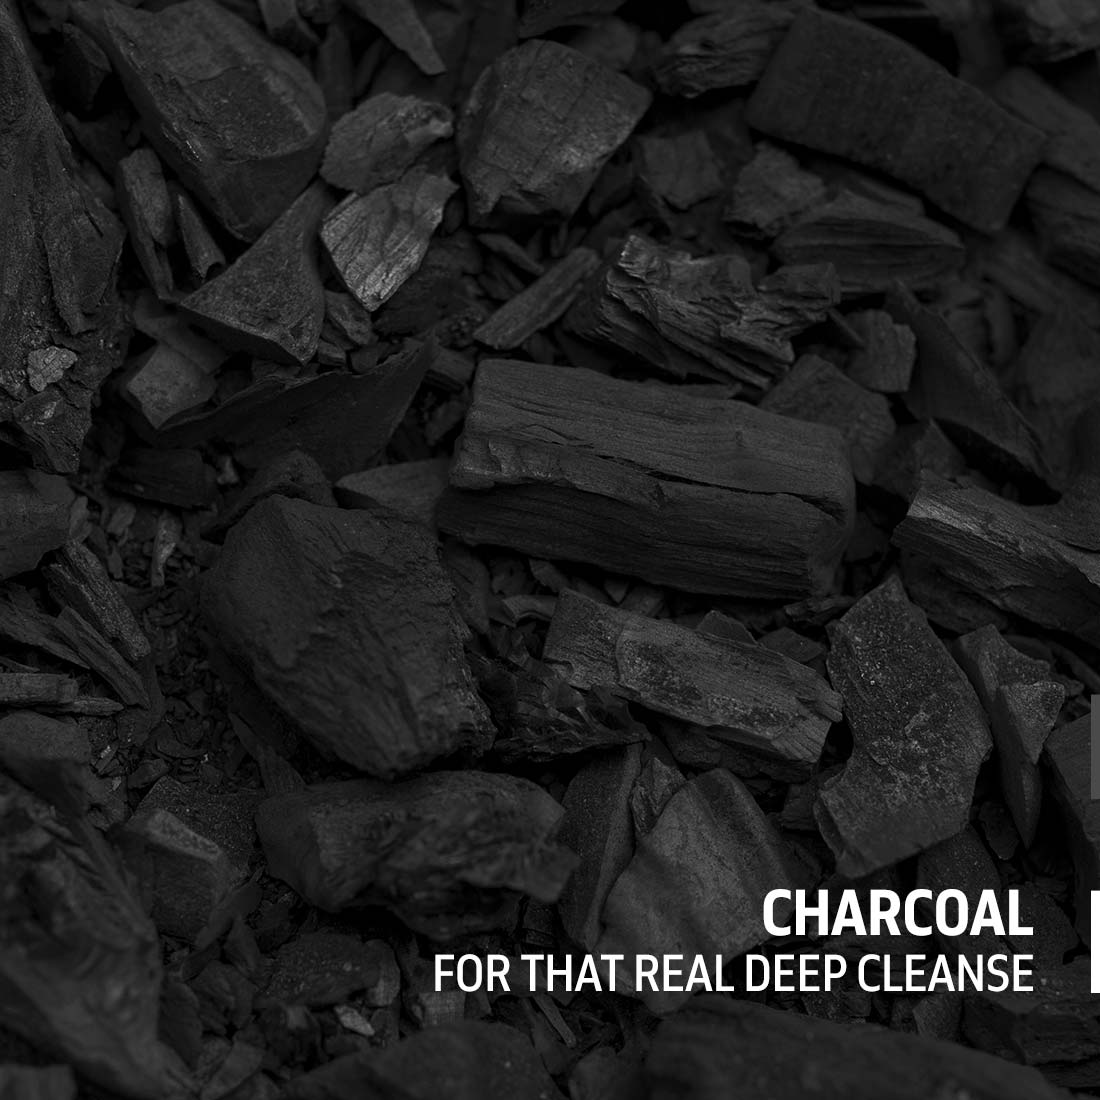 Phy Charcoal Face Wash